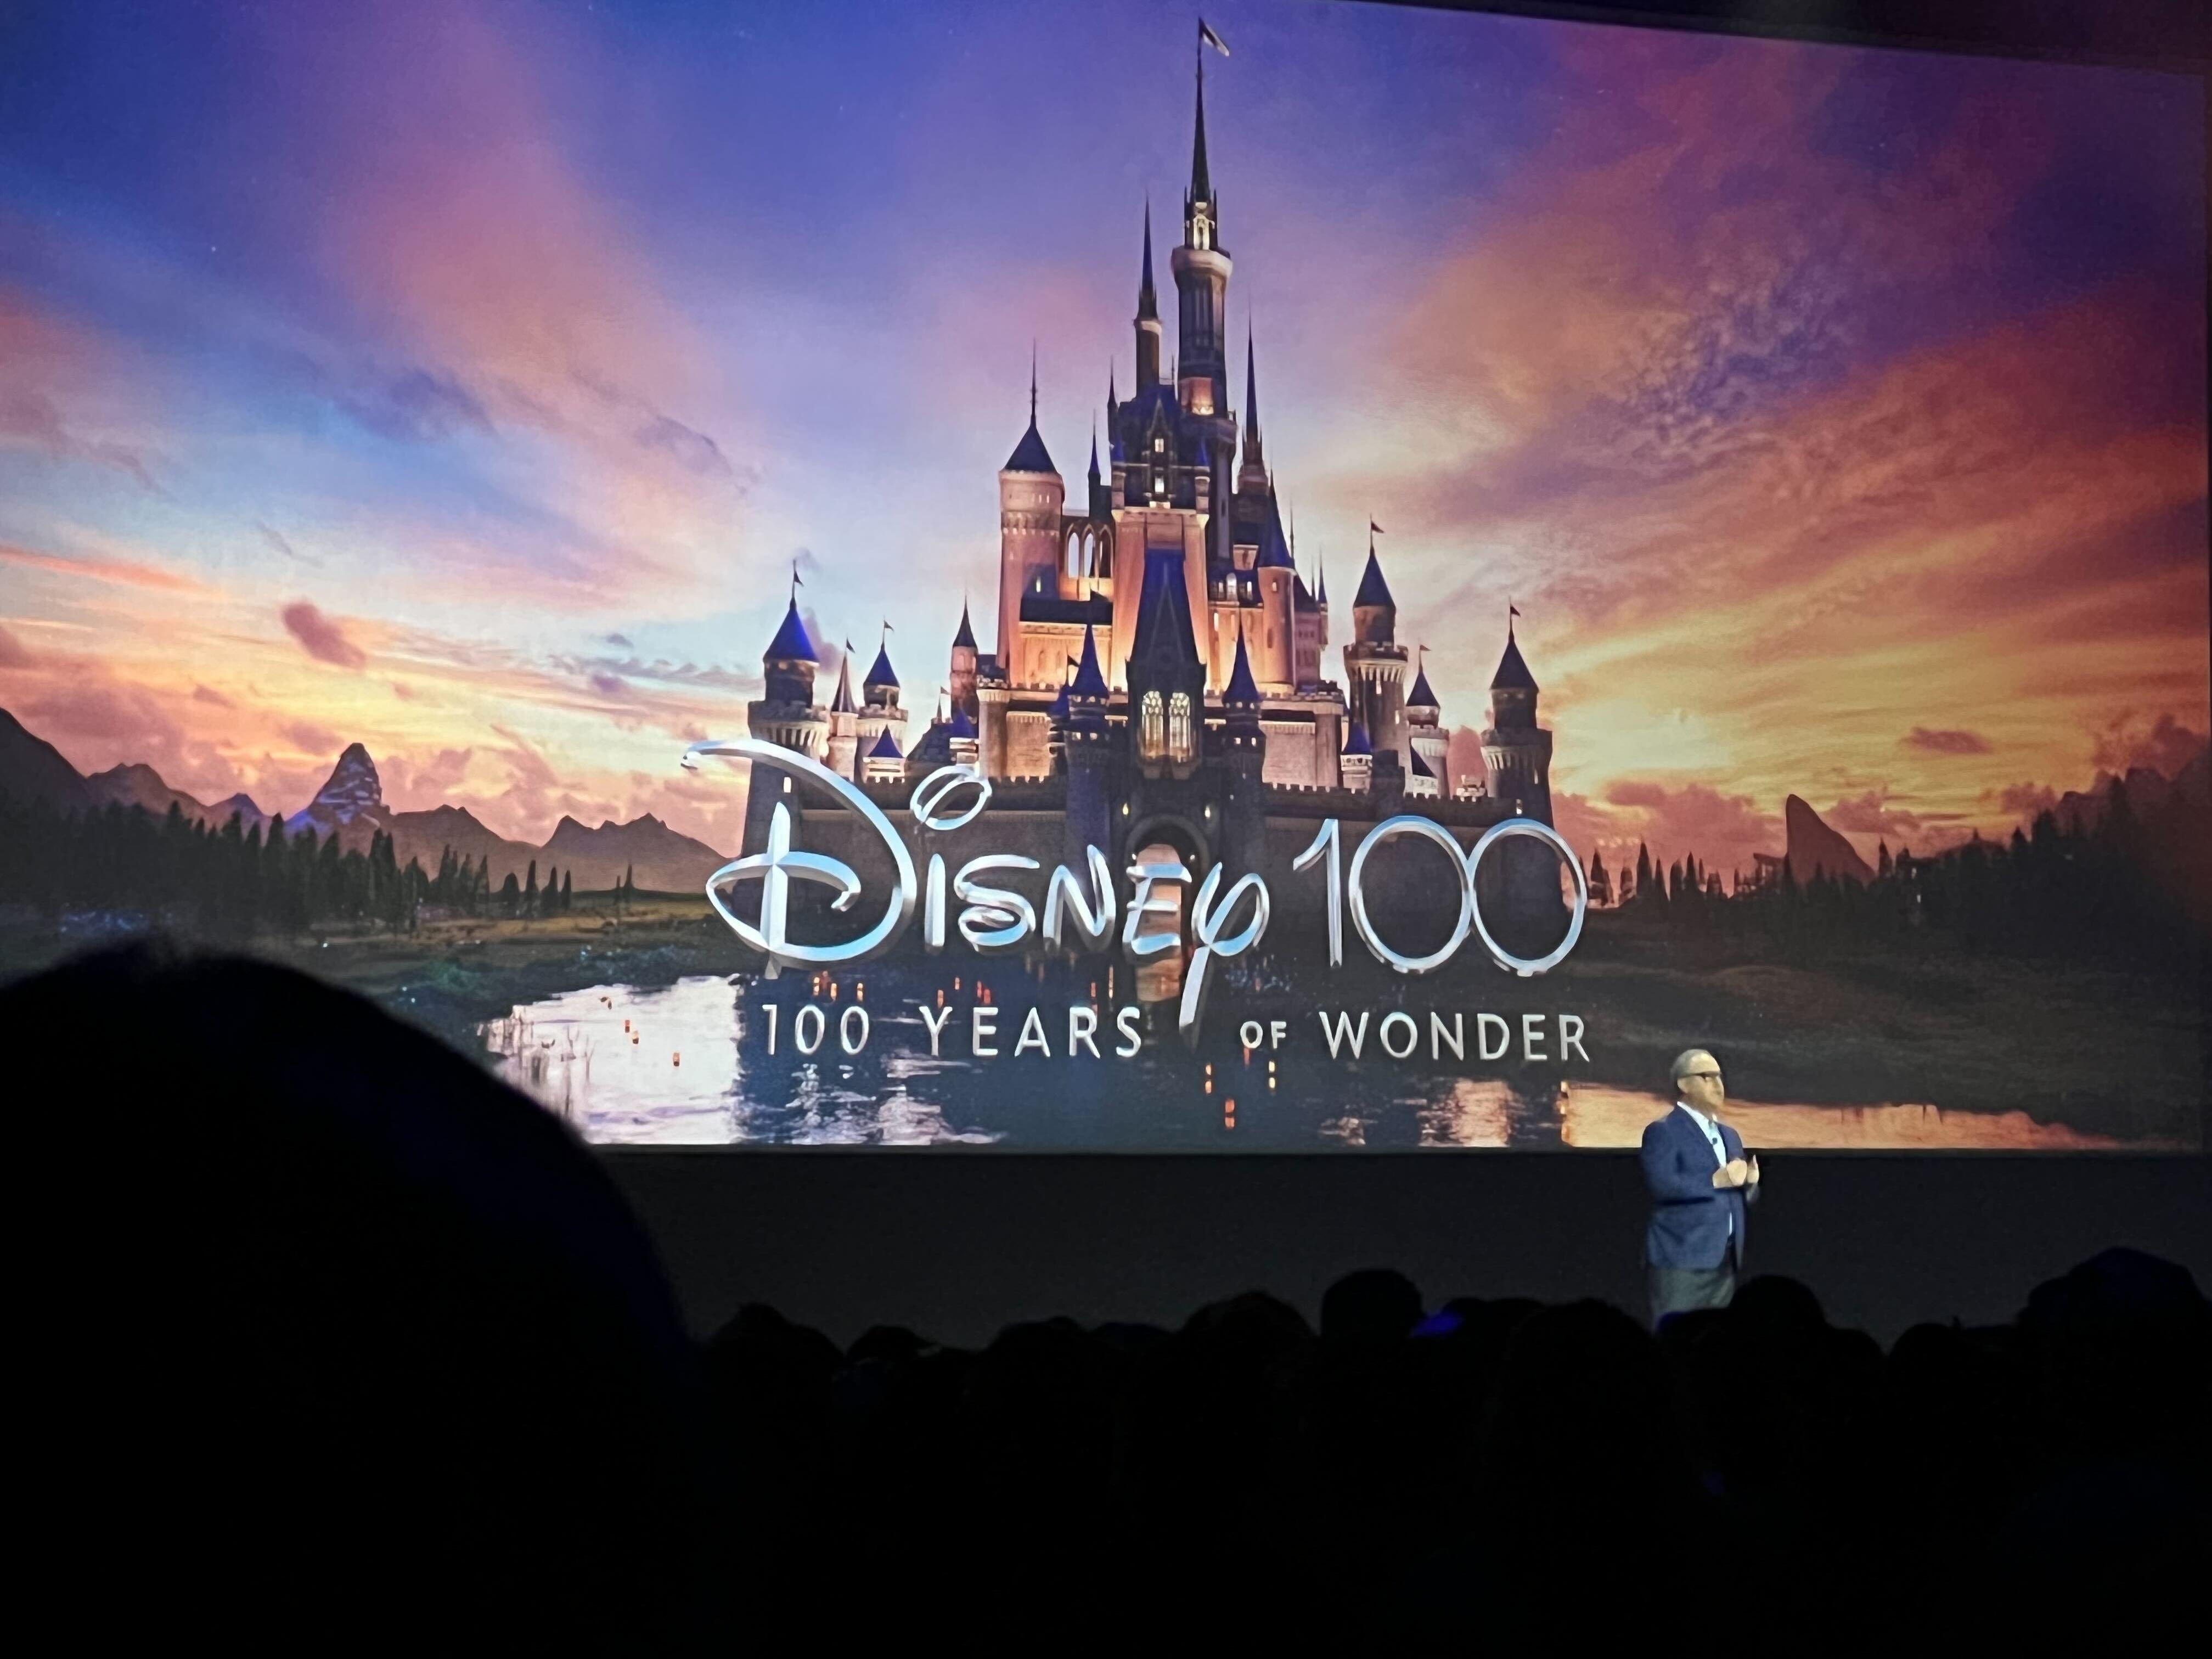 Disney's 100th Anniversary Title Card Revealed